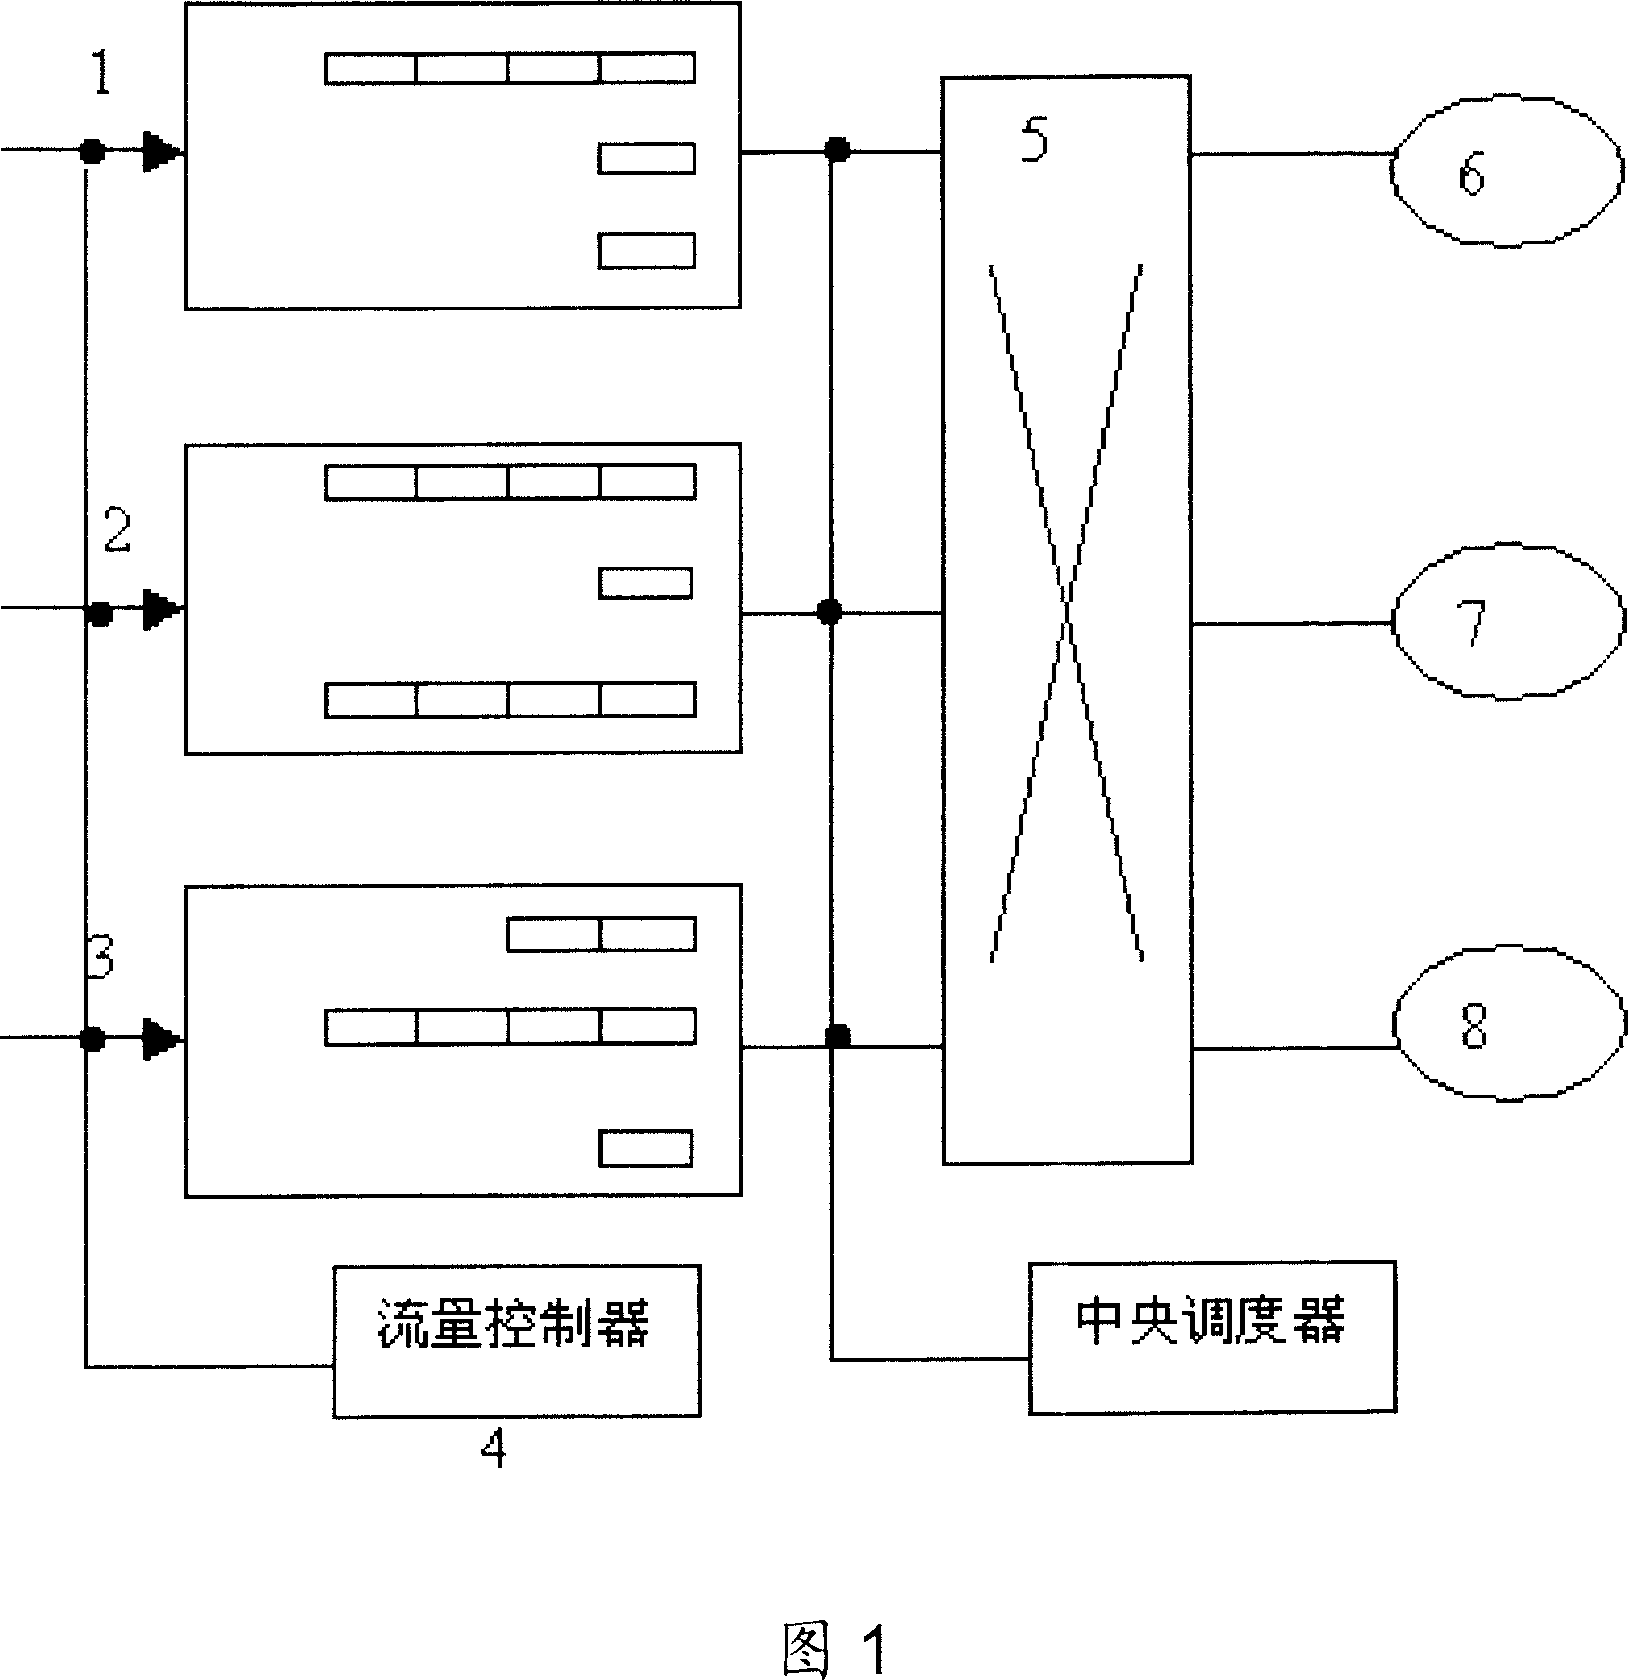 Method for exchange system for inputting end of two-stage queuing structure